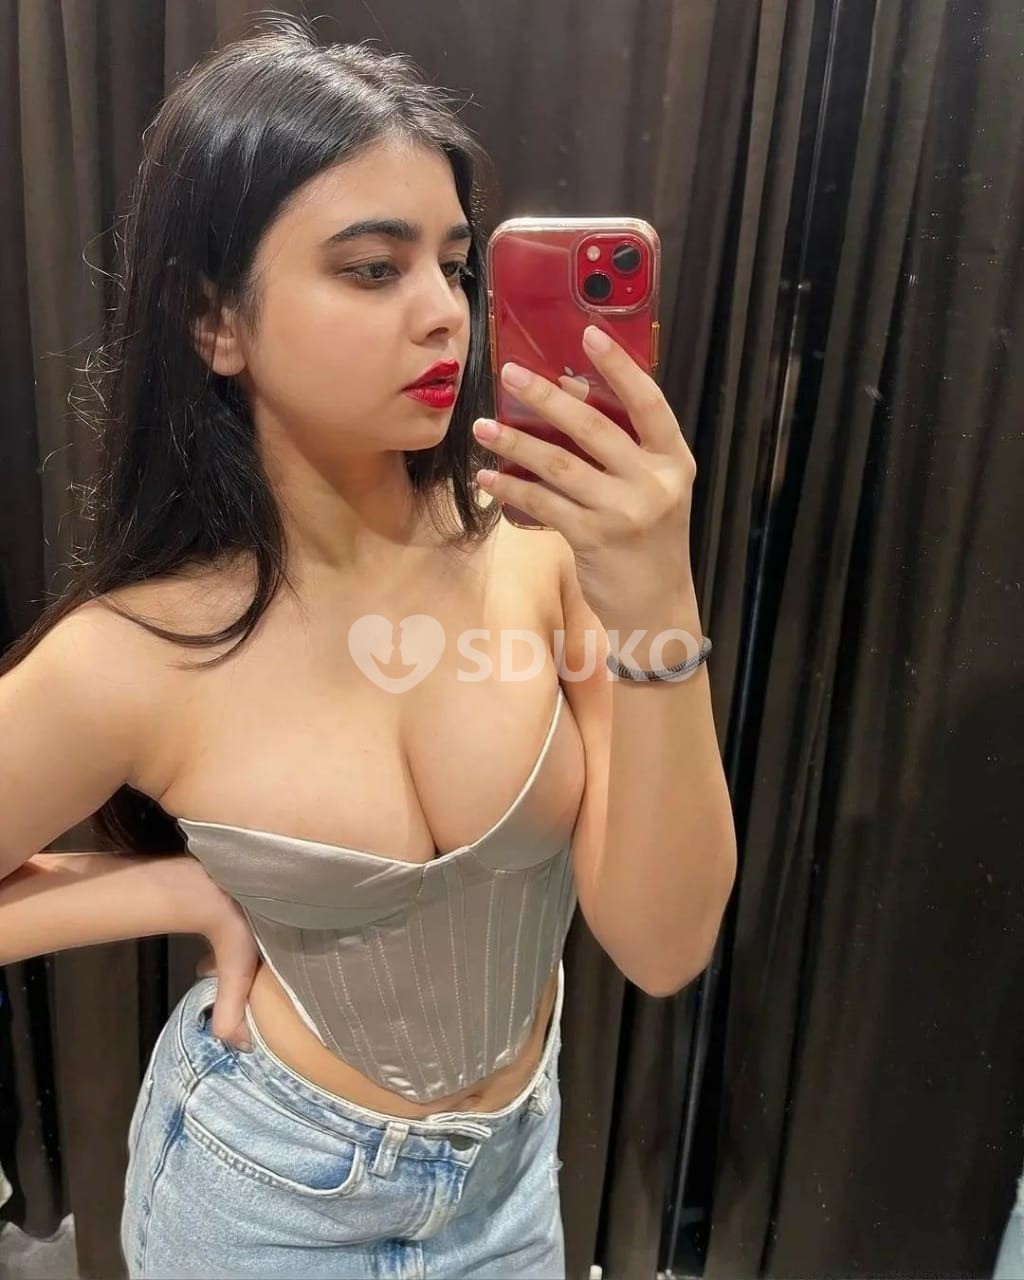 JAIPUR VIP TODAY LOW PRICE -&ESCORT 🥰SERVICE 100% SAFE AND SECURE ANYTIME CALL ME 24 X 7 SERVICE AVAILABLE 100% SAFE